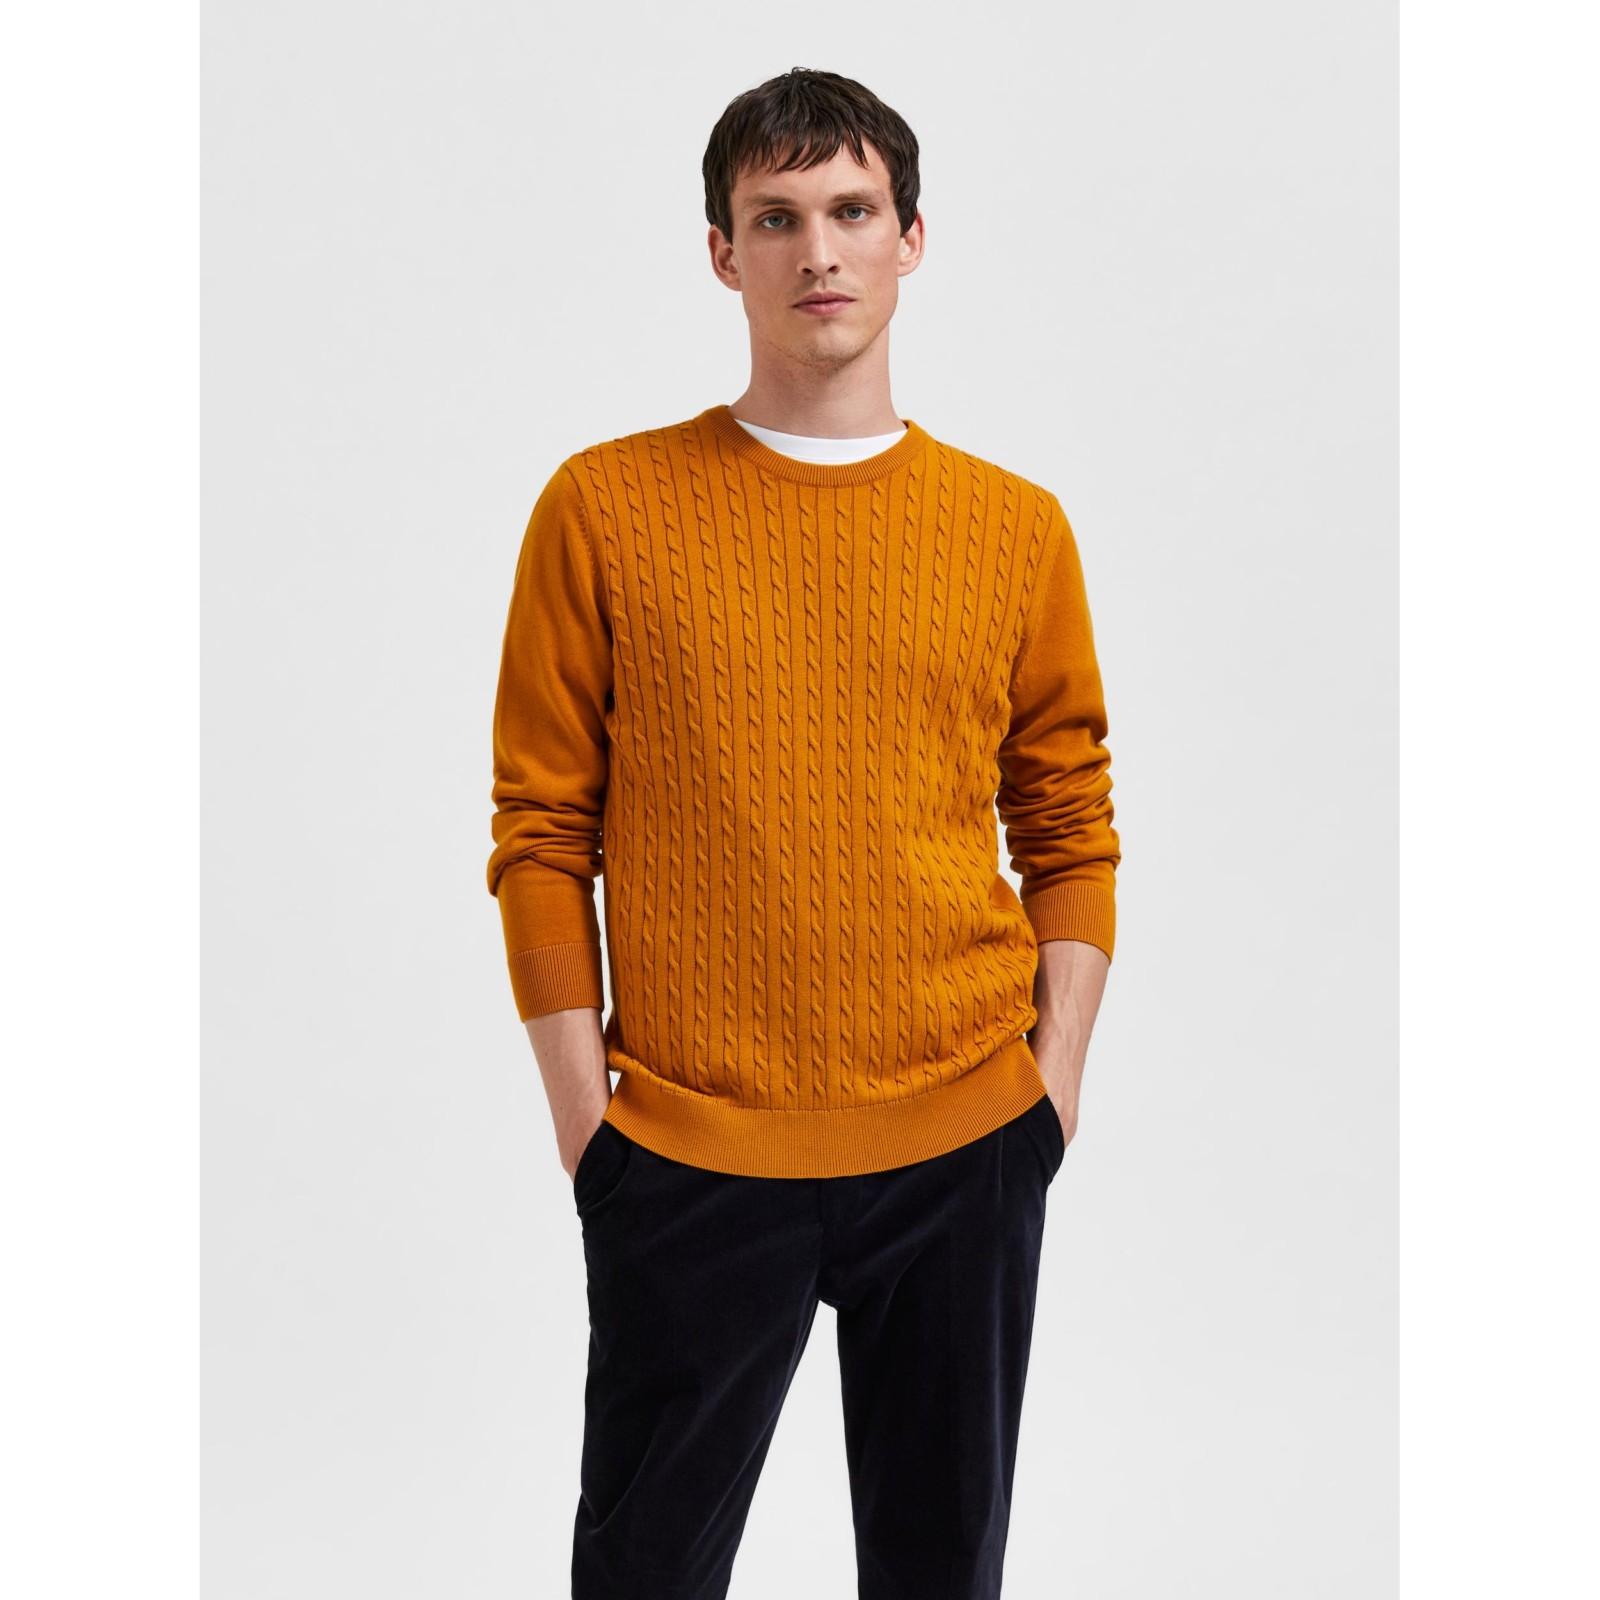 SELECTED-HOMME_aiko-knit-cable-crew-neck_sinapinkeltainen_3996492_16086736